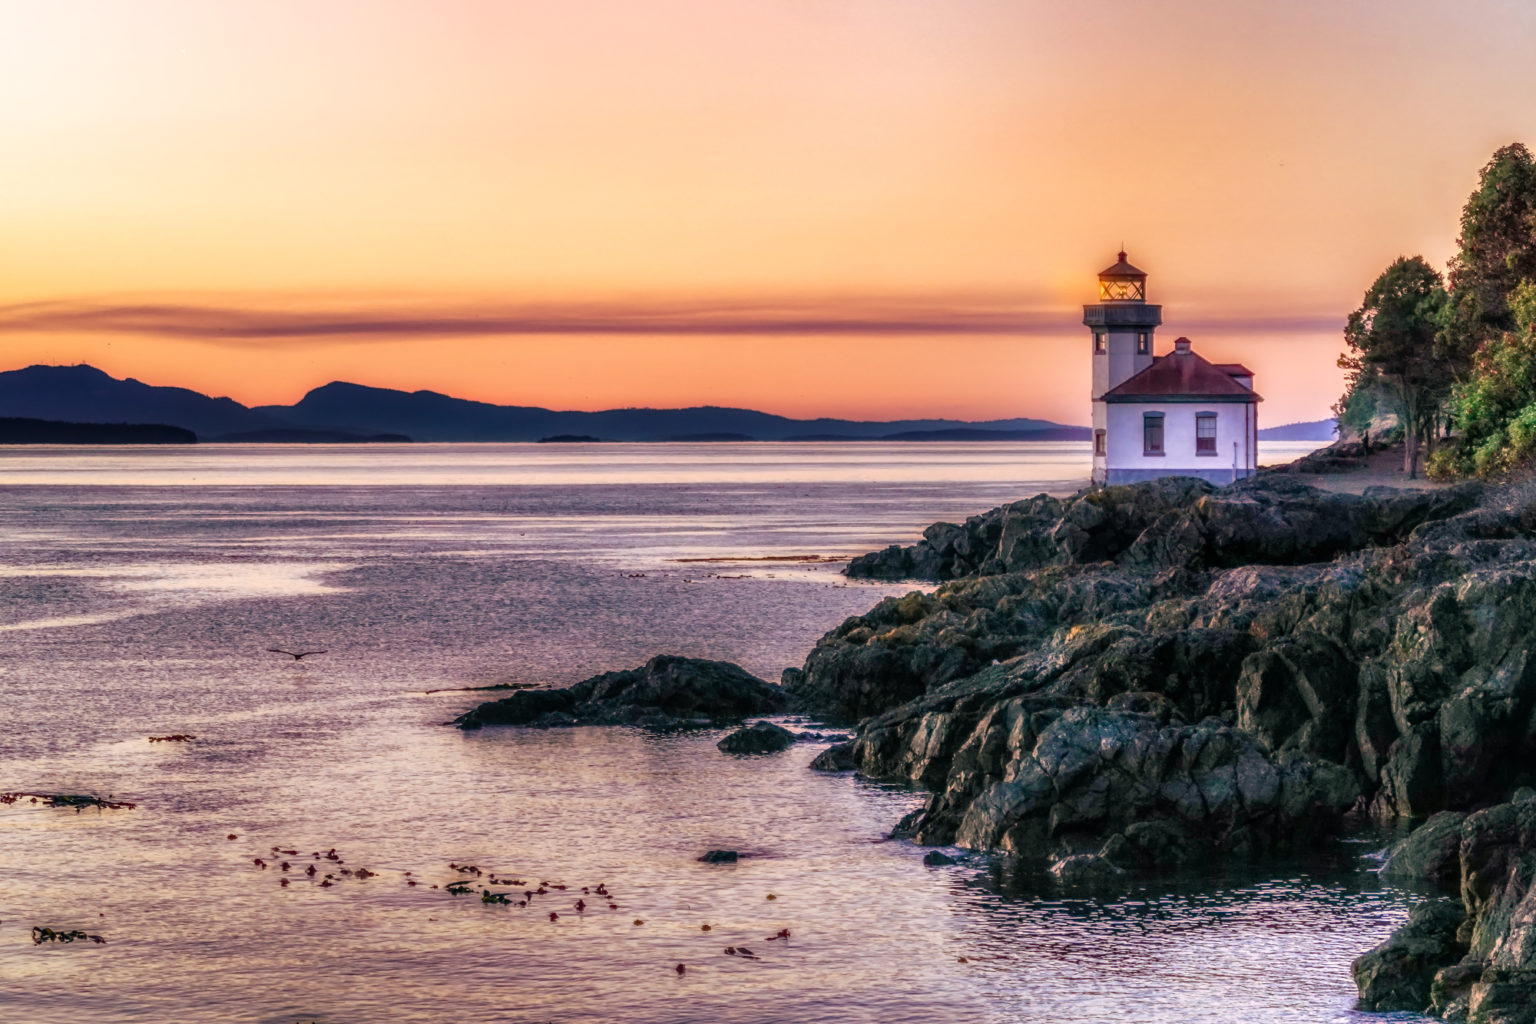 Lighthouse, San Juan Island, Washington, USA.The straits that this island overlooks is one of the best spots to watch whales migrate through.